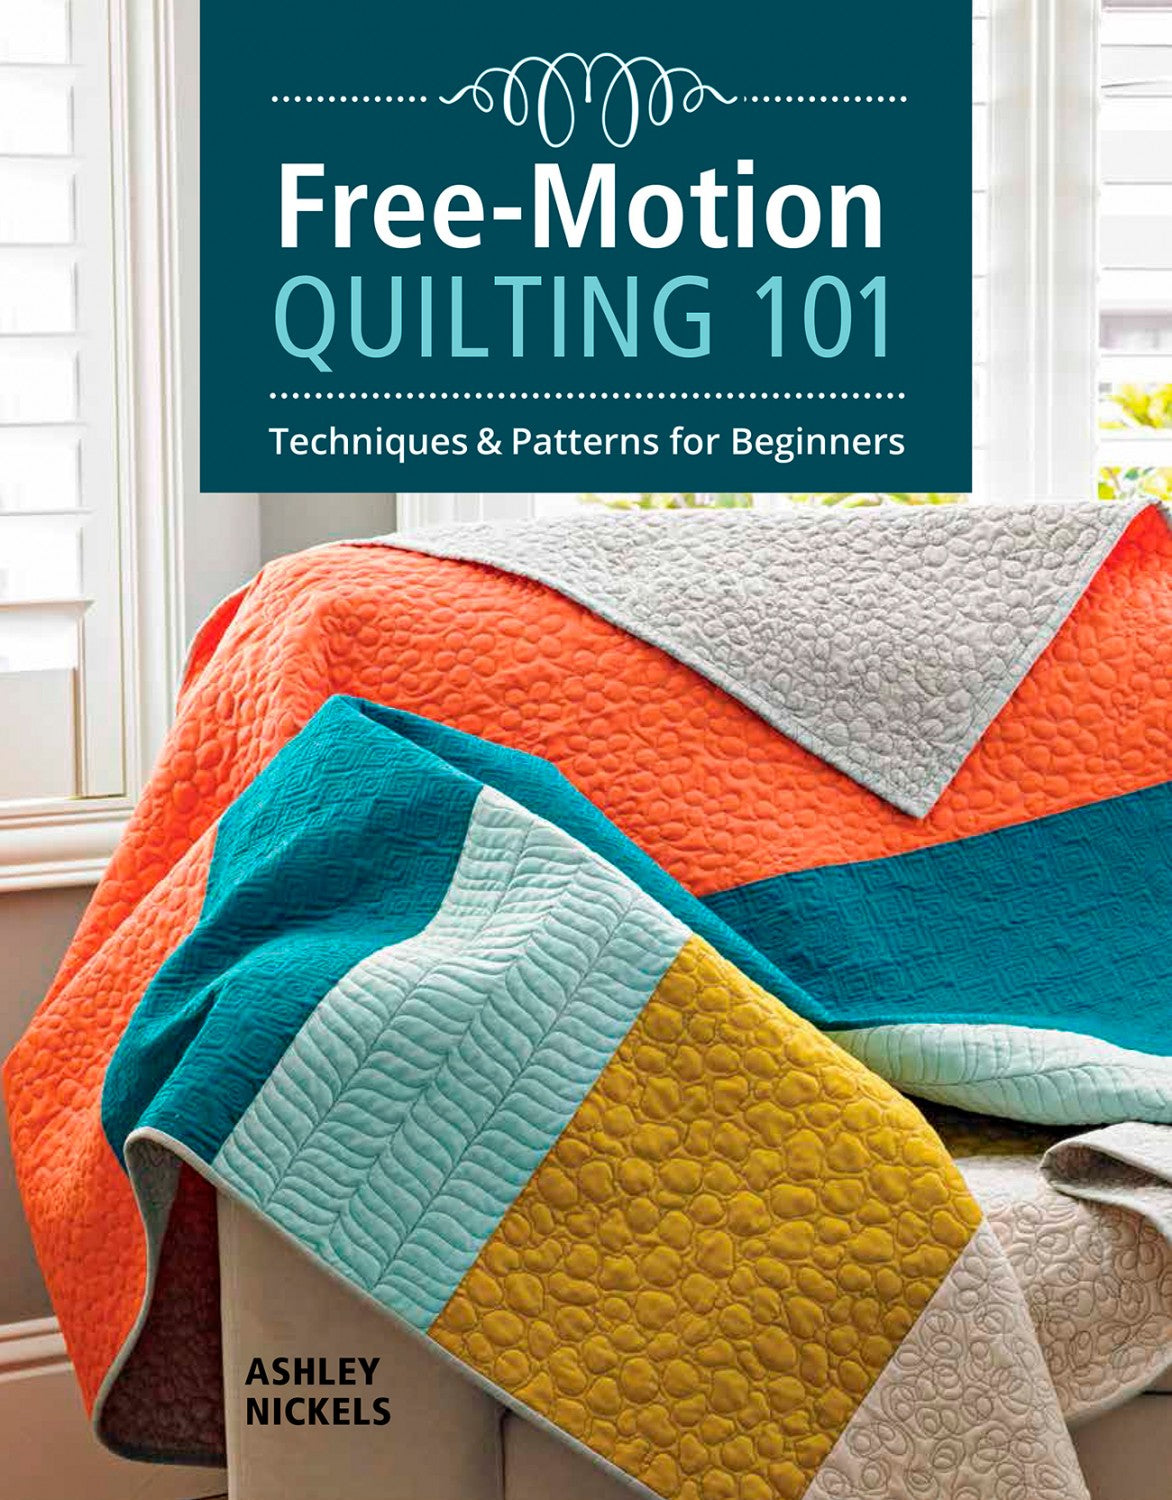 Free Motion Quilting 101 by Ashley Nickles